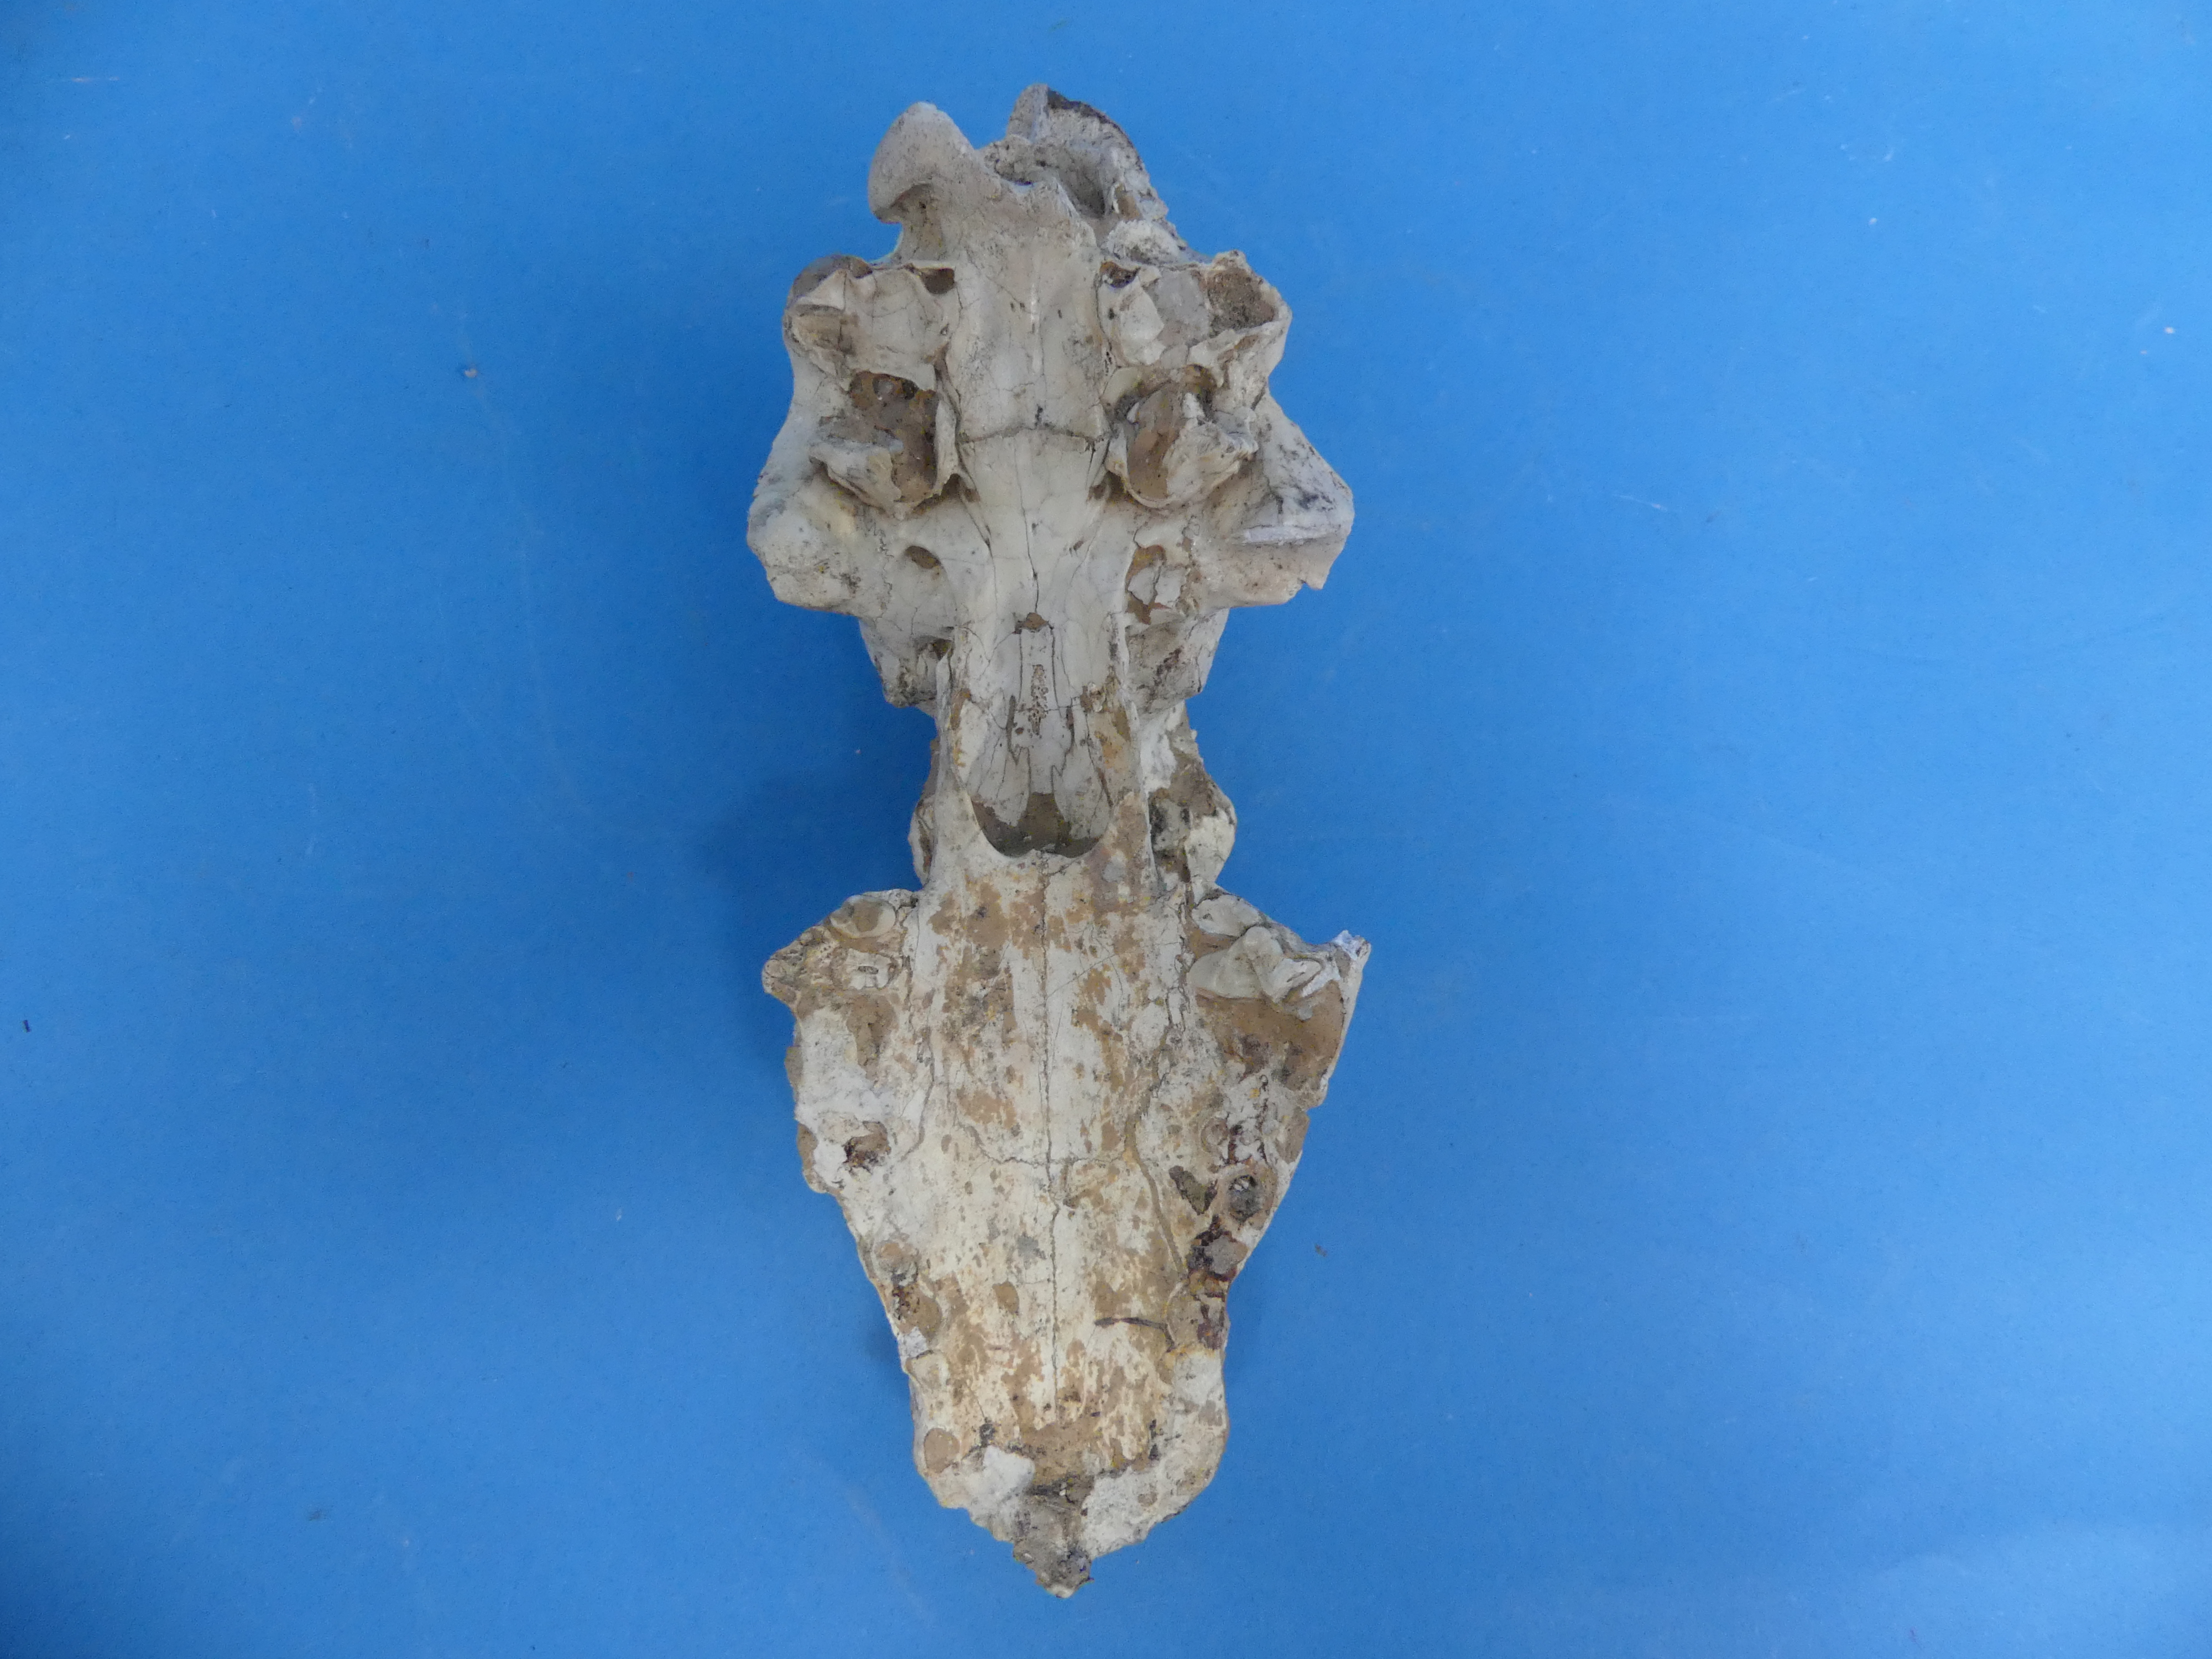 Natural History, Paleontology and Minerals; An Early Wolf (CANIS FALCONERI) Skull, Early Pleistocene - Image 12 of 12